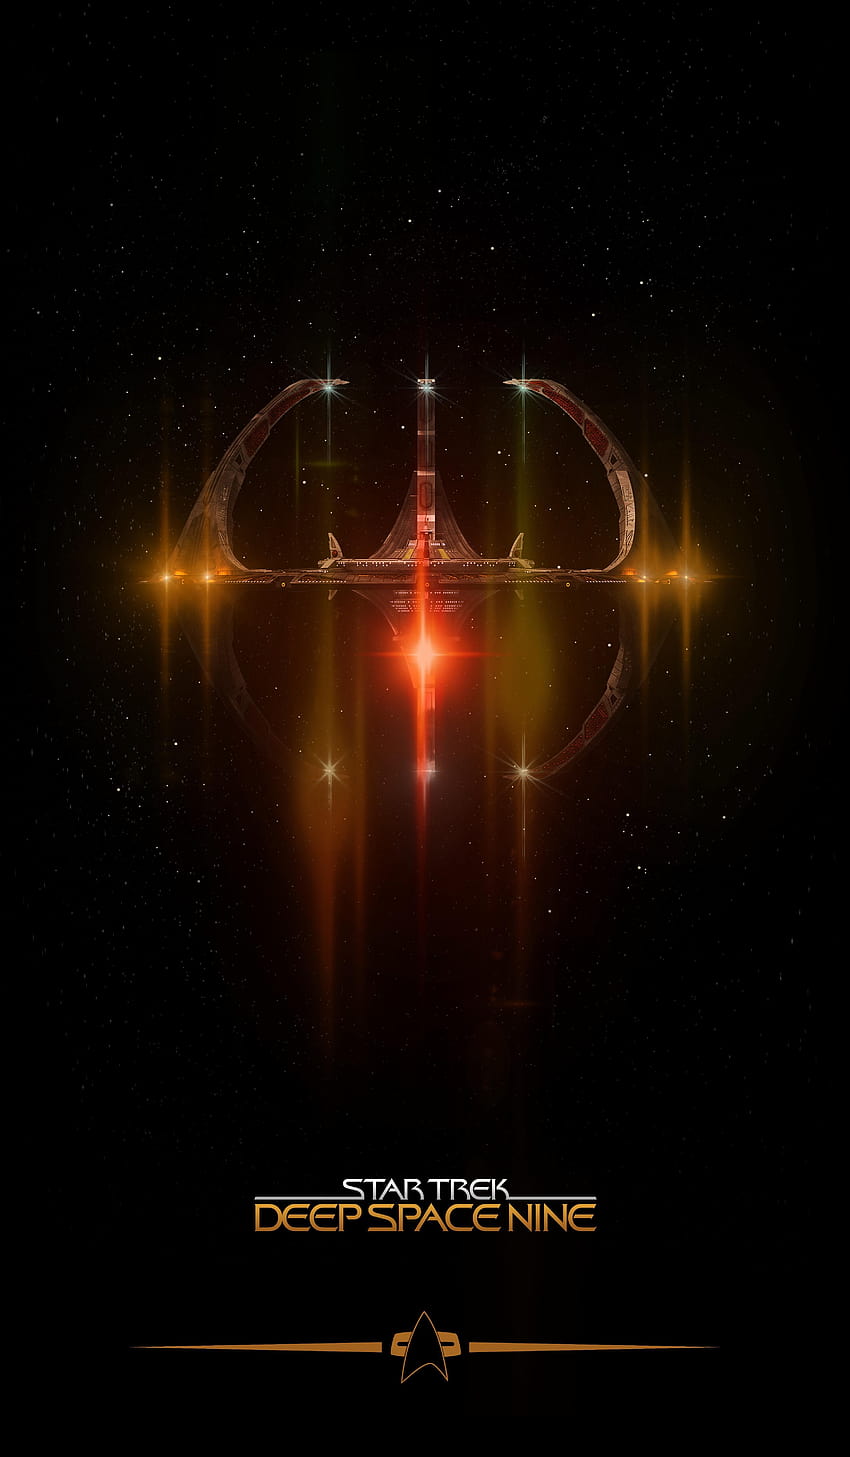 Star Trek Live Wallpaper APK - Free download for Android